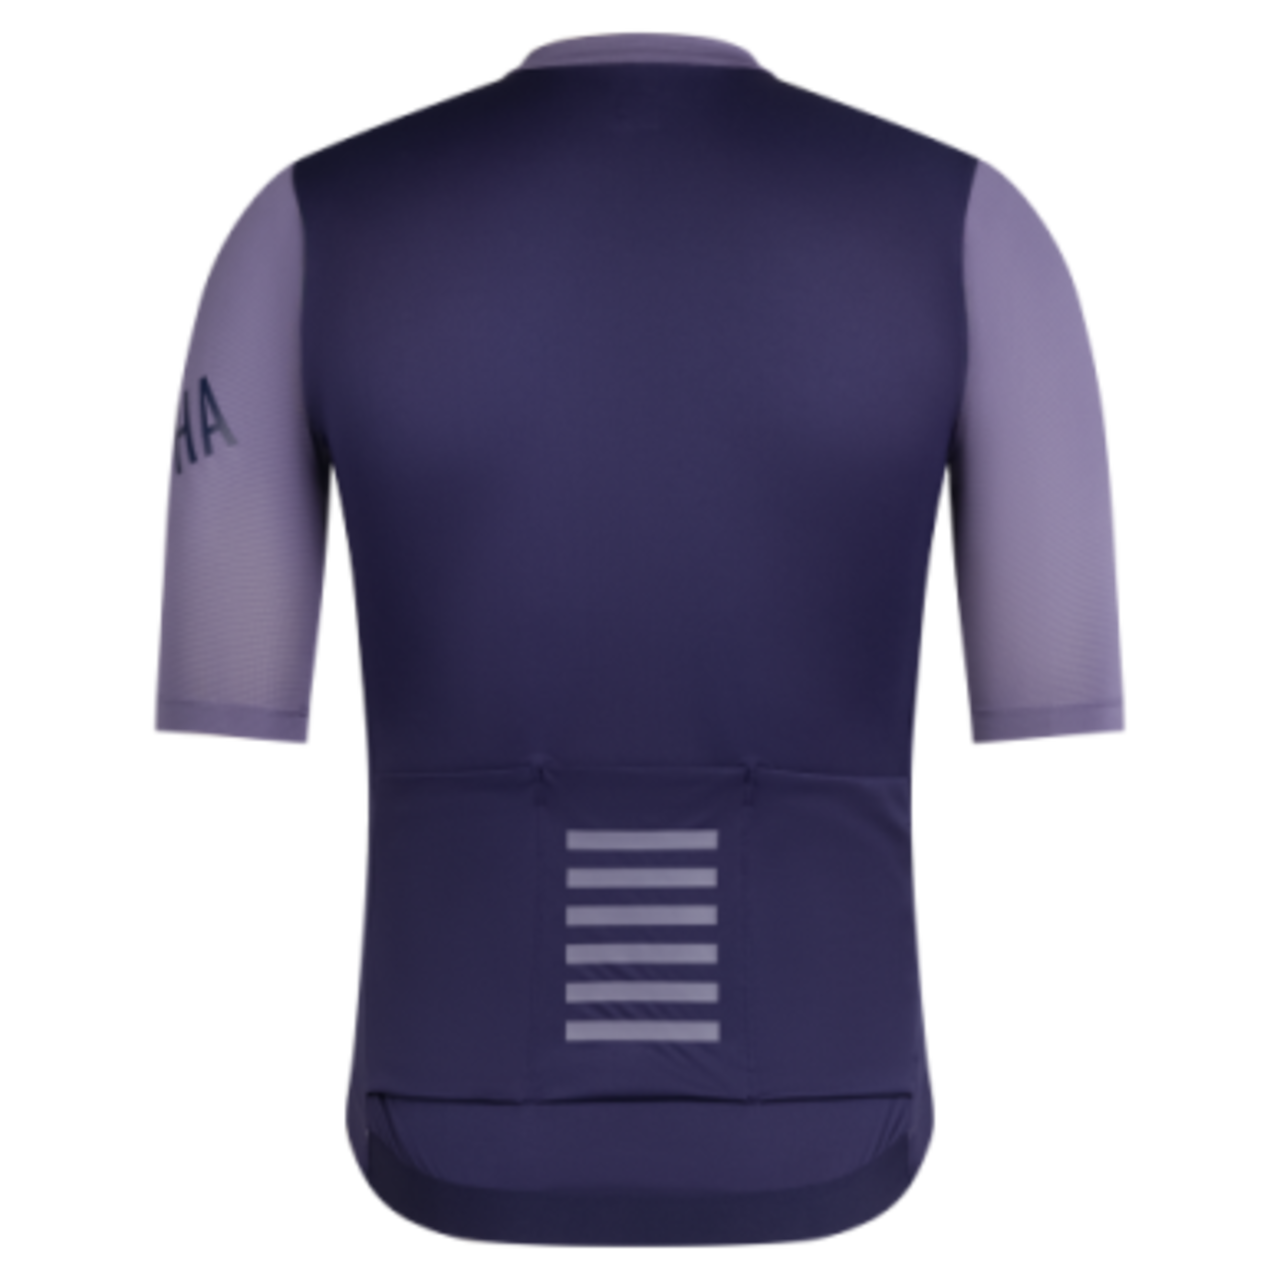 RAPHA MEN'S PRO TEAM TRAINING JERSEY Dusted Lilac/Navy Purple